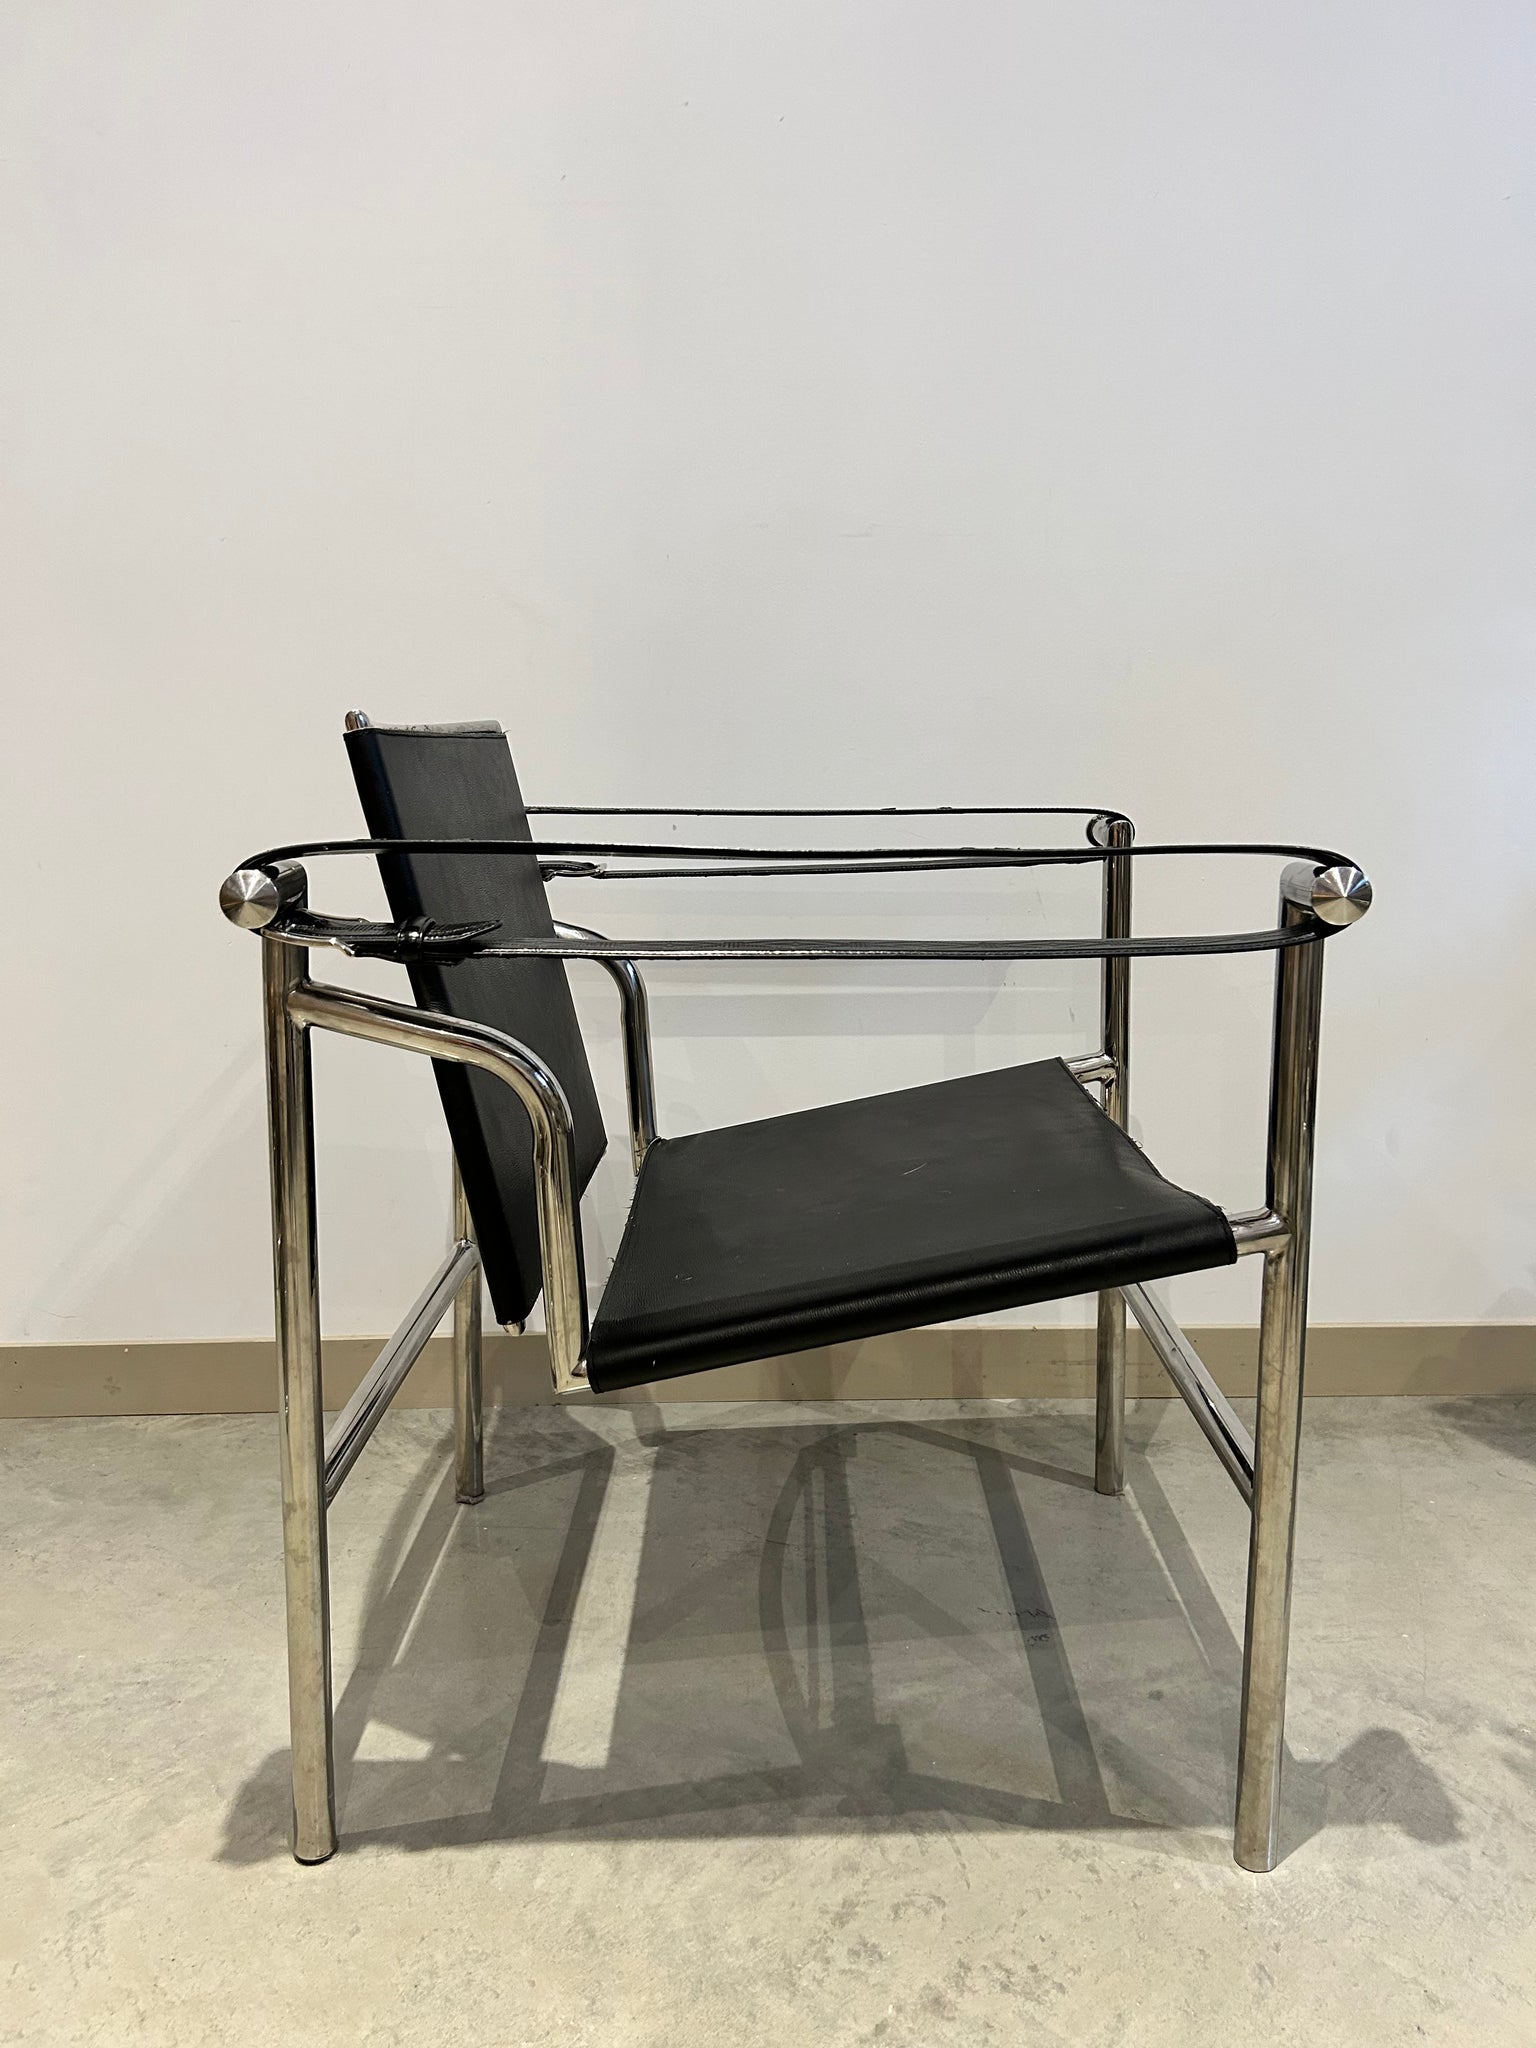 Black LC1 Le Corbusier sling armchairs